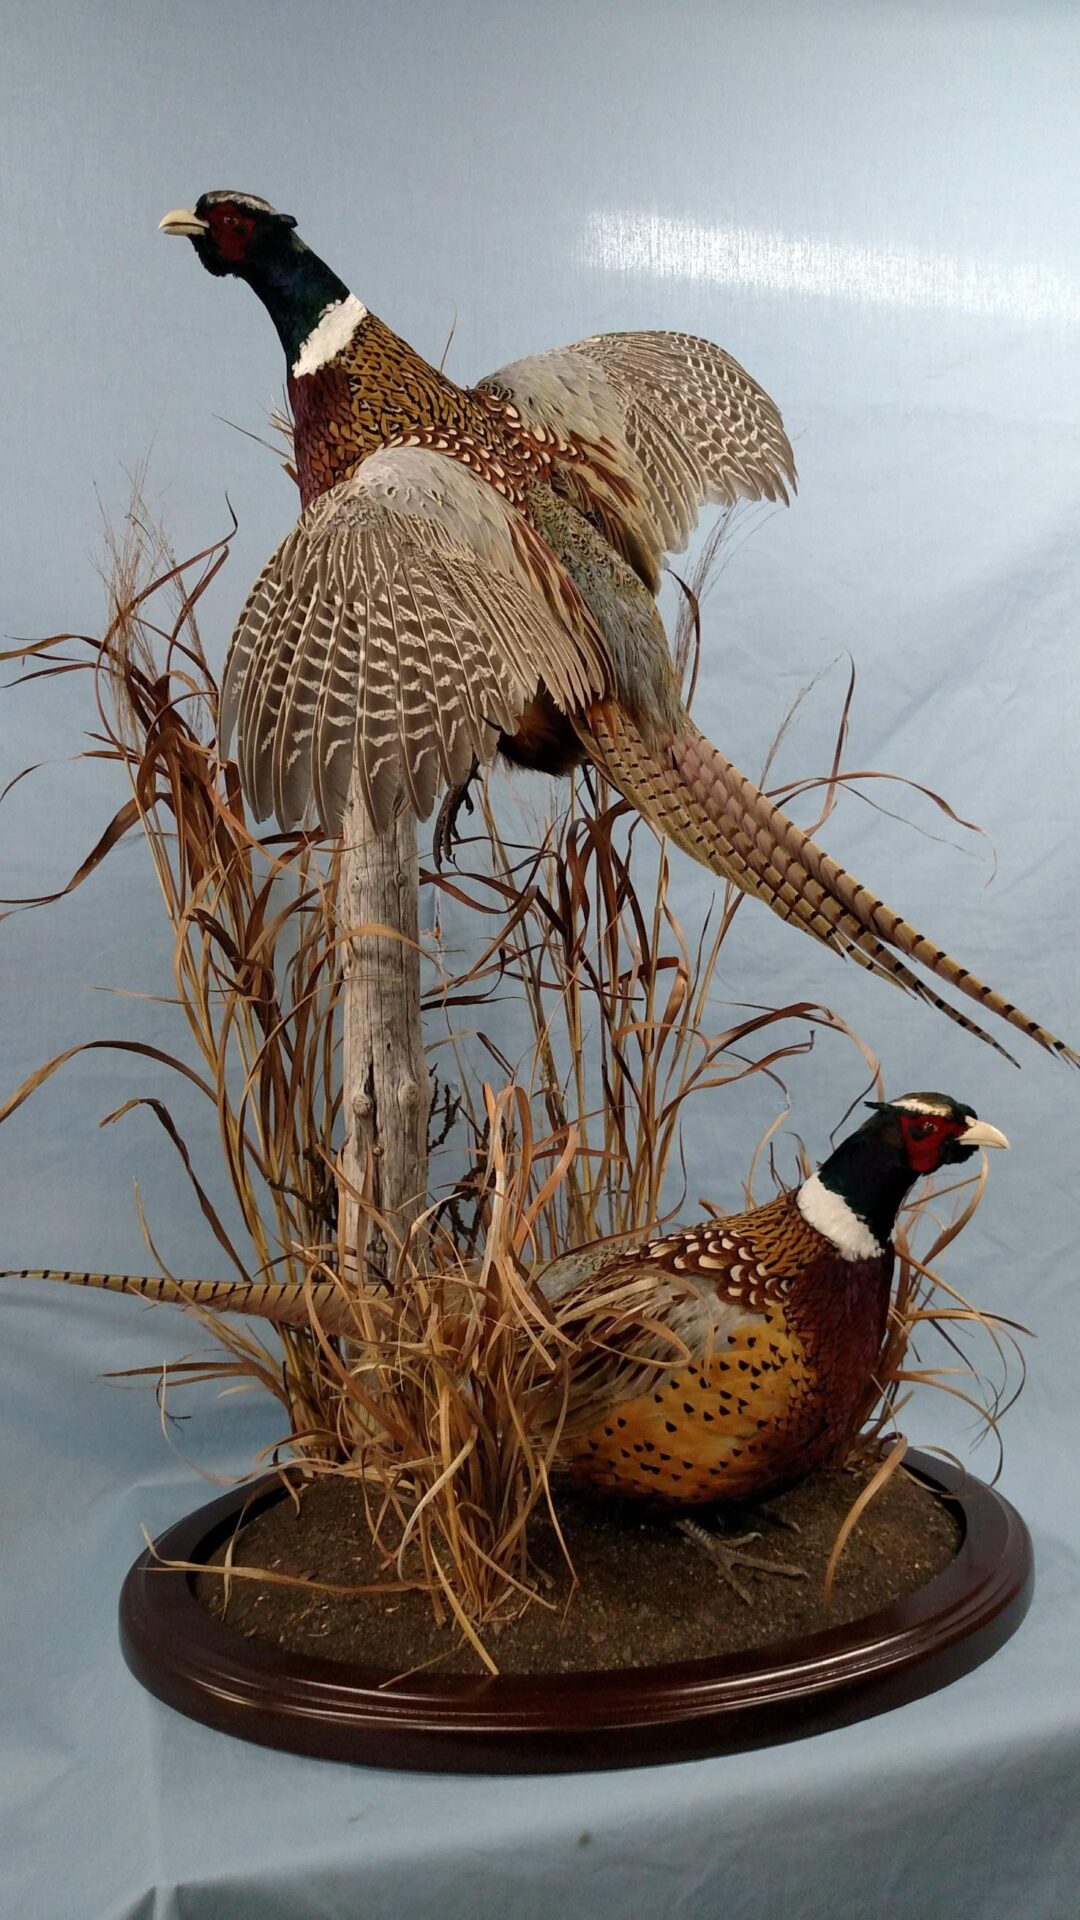 Taxidermy of birds created along with their nests